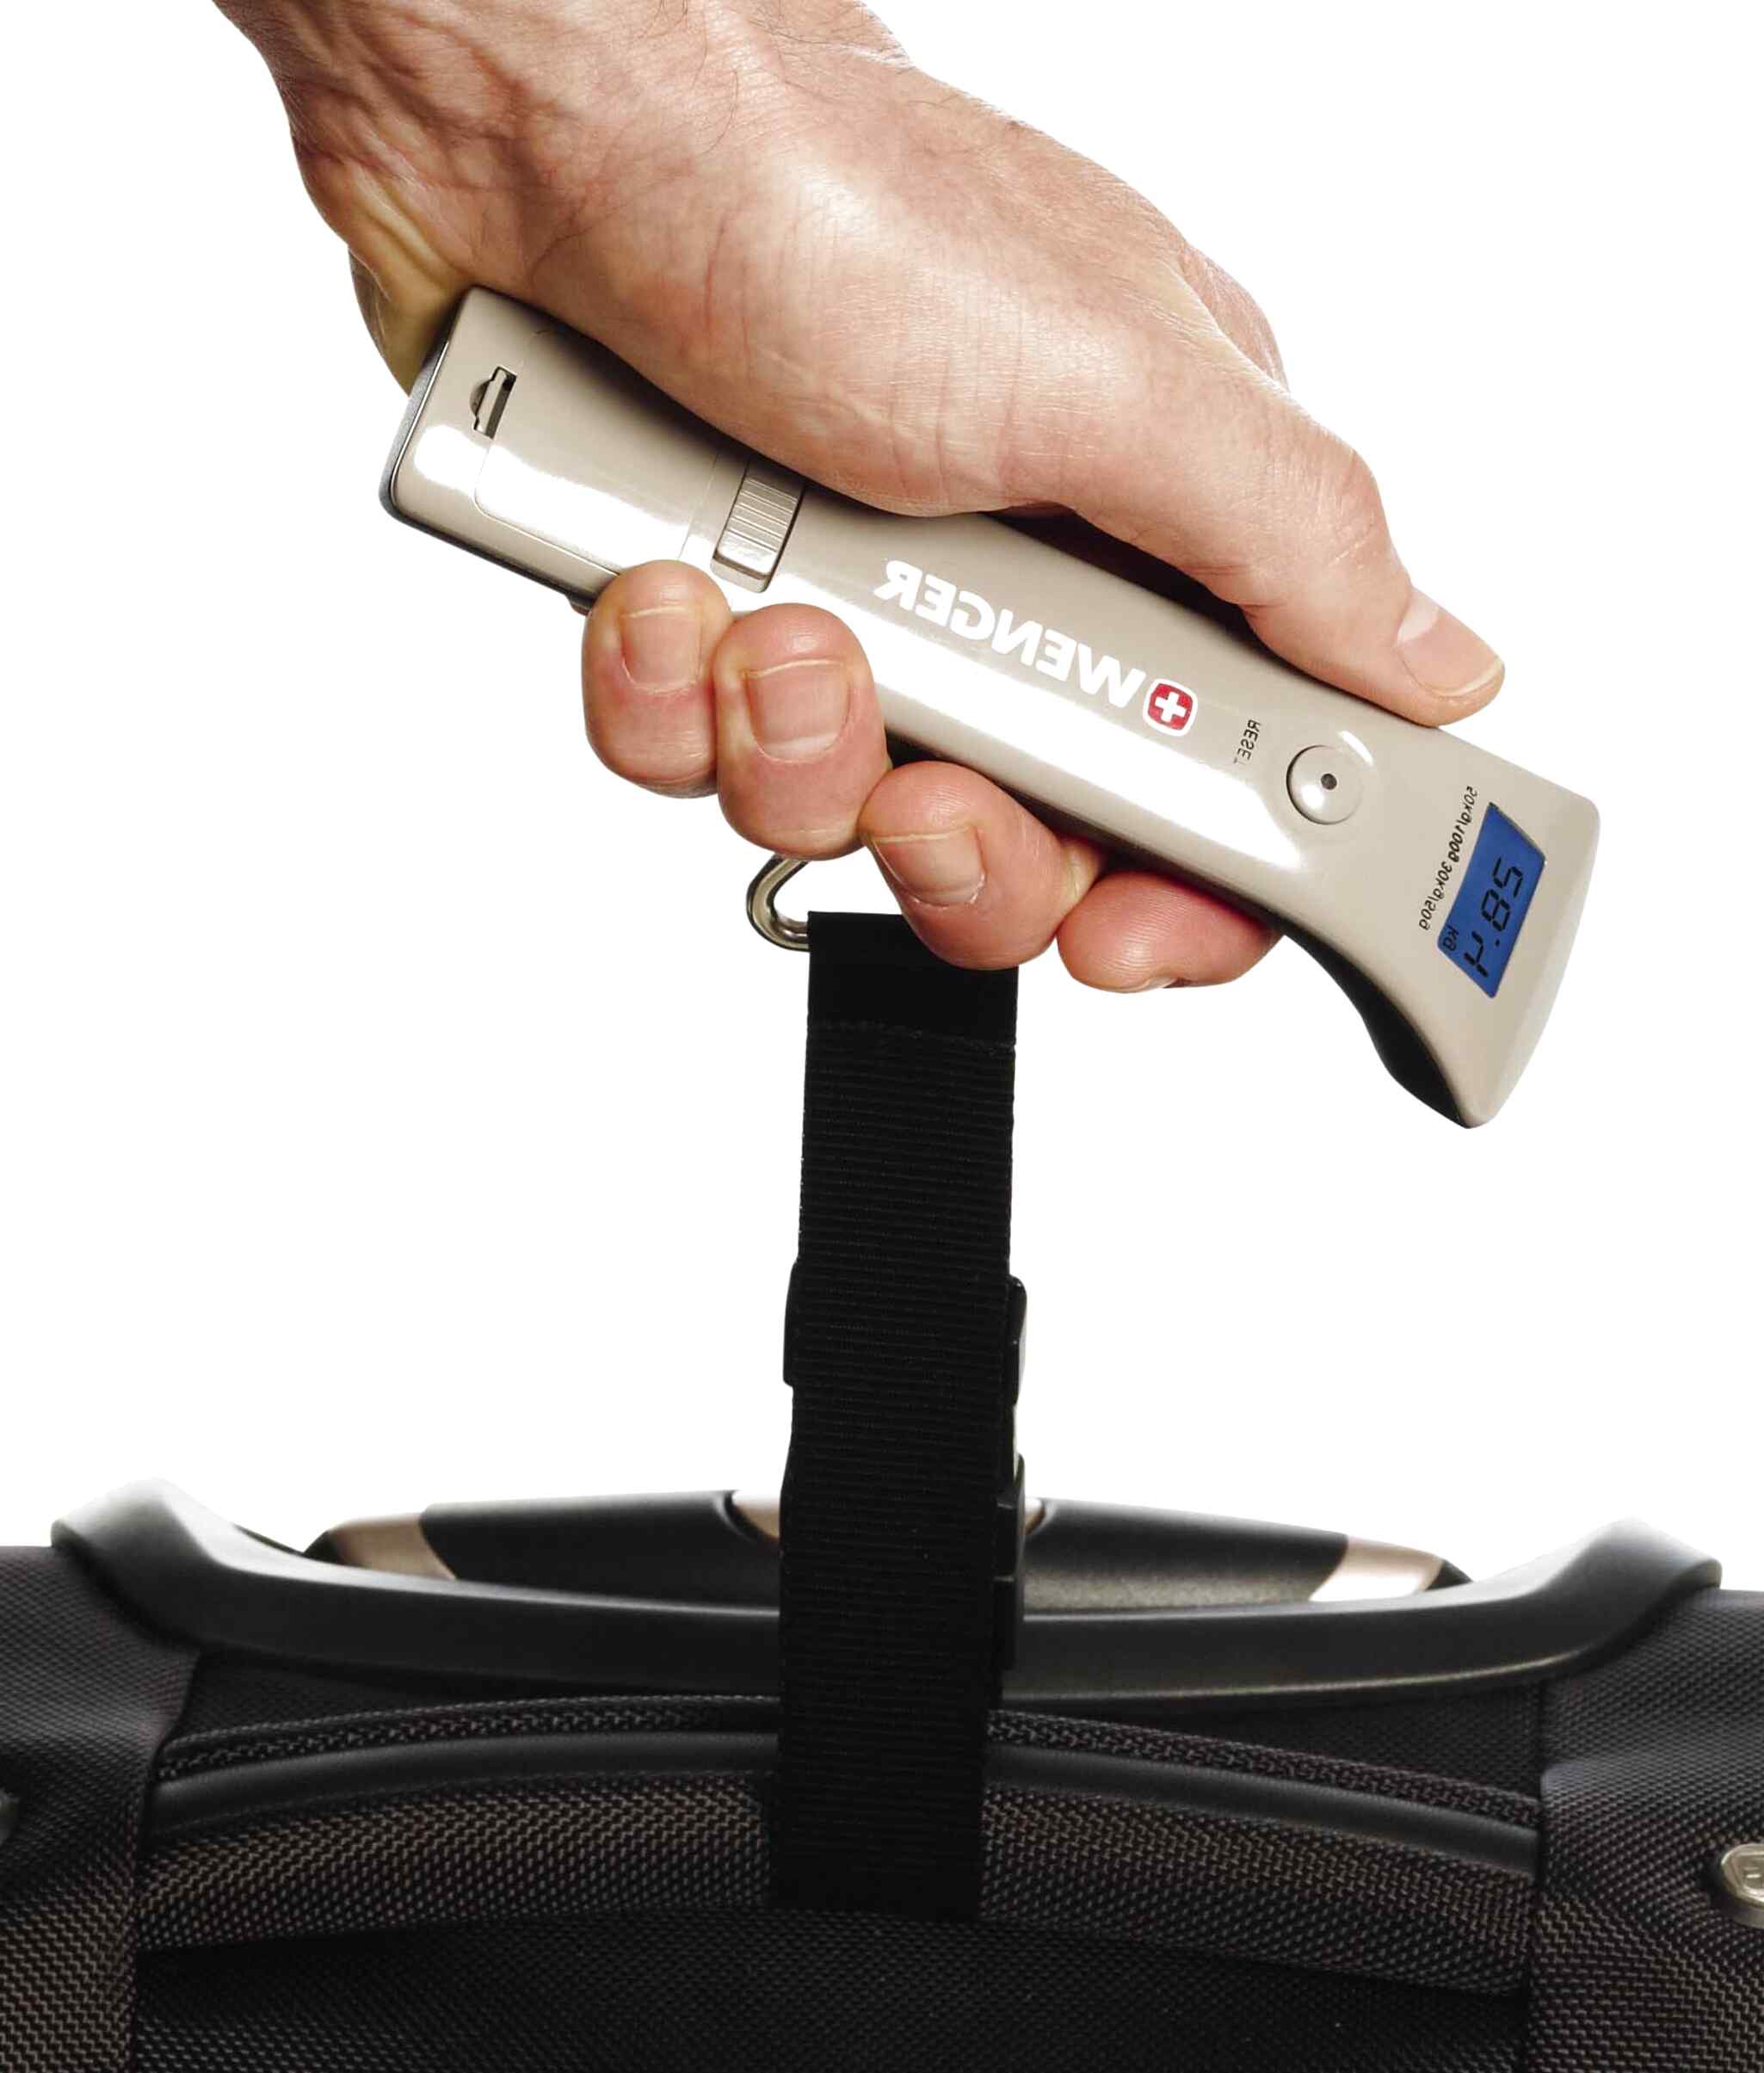 wenger travel scales